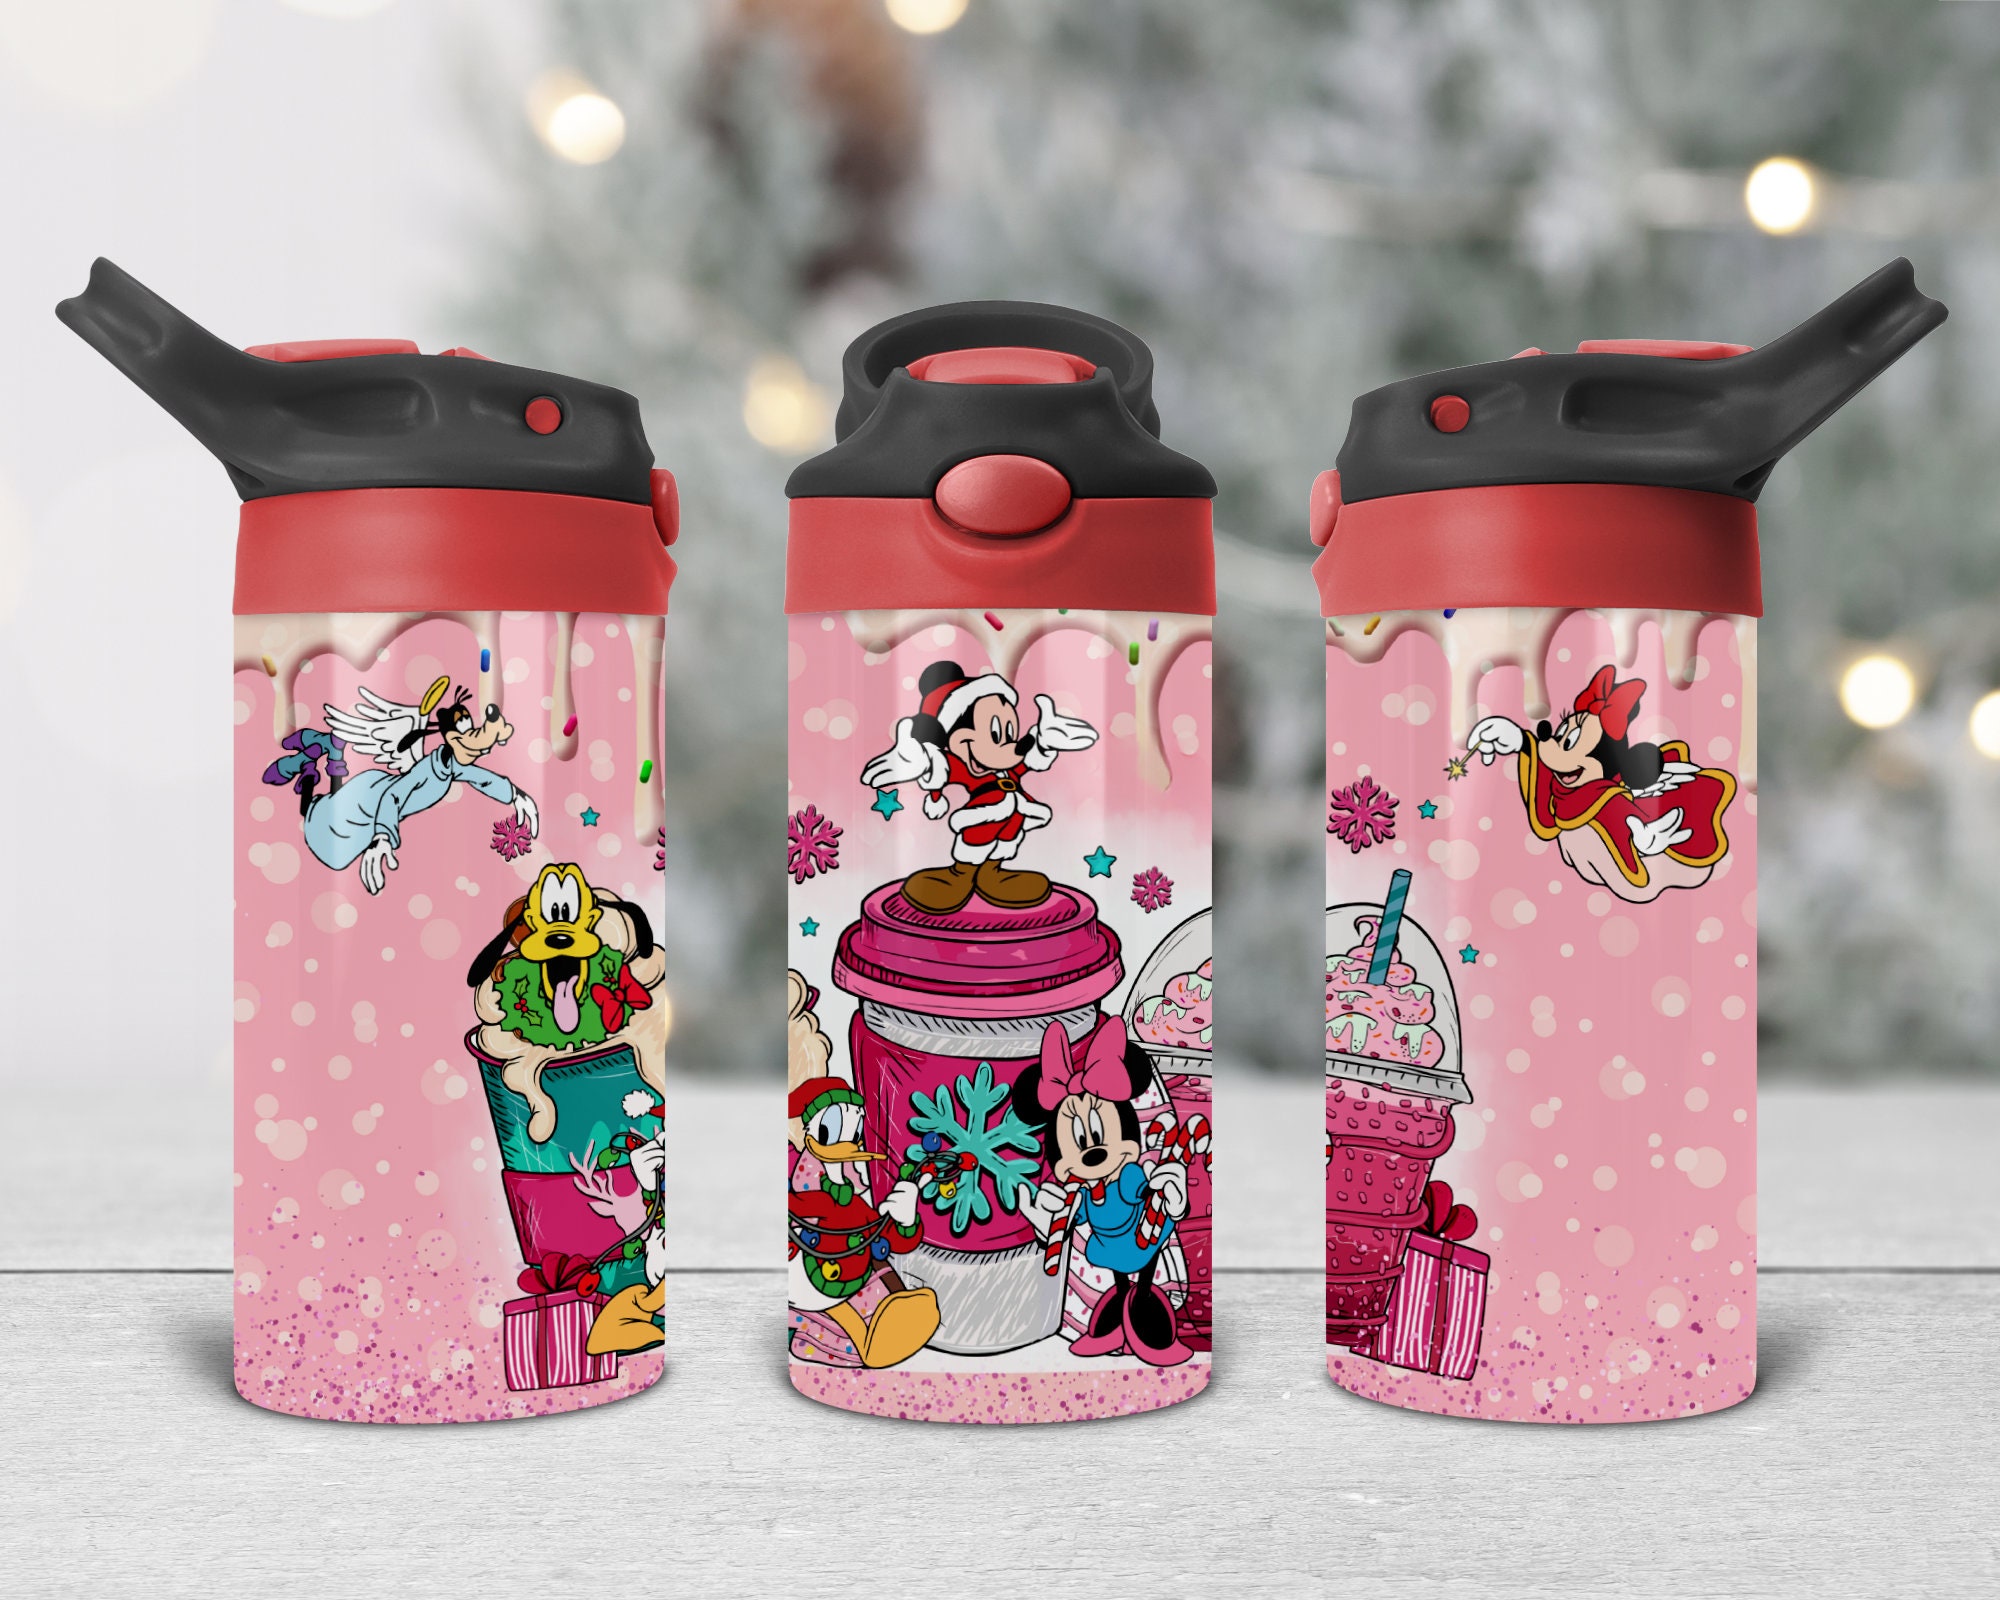 Disney Kids Water Bottles Mickey Minnie Mouse Cartoon Cups with